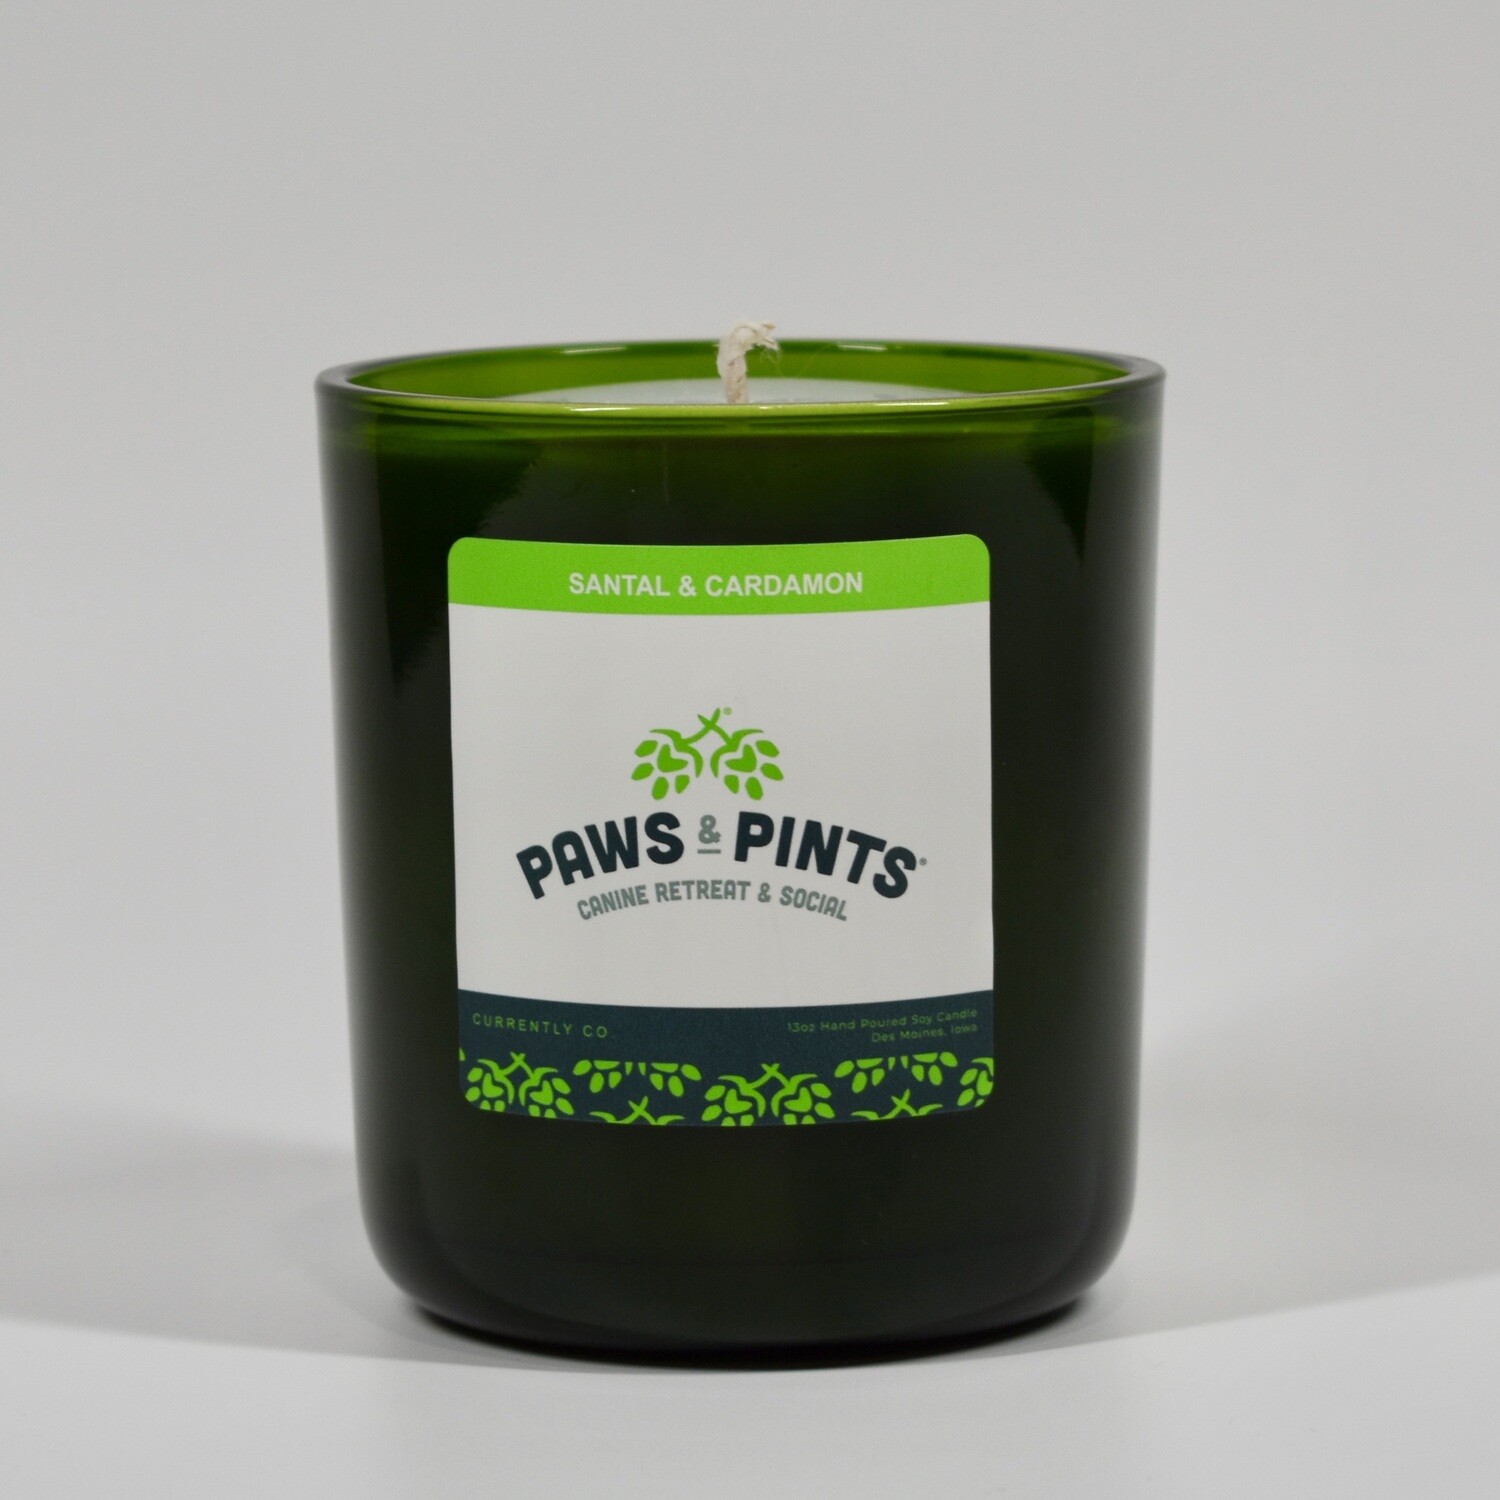 Currently Co - P&amp;P Candle - Santal